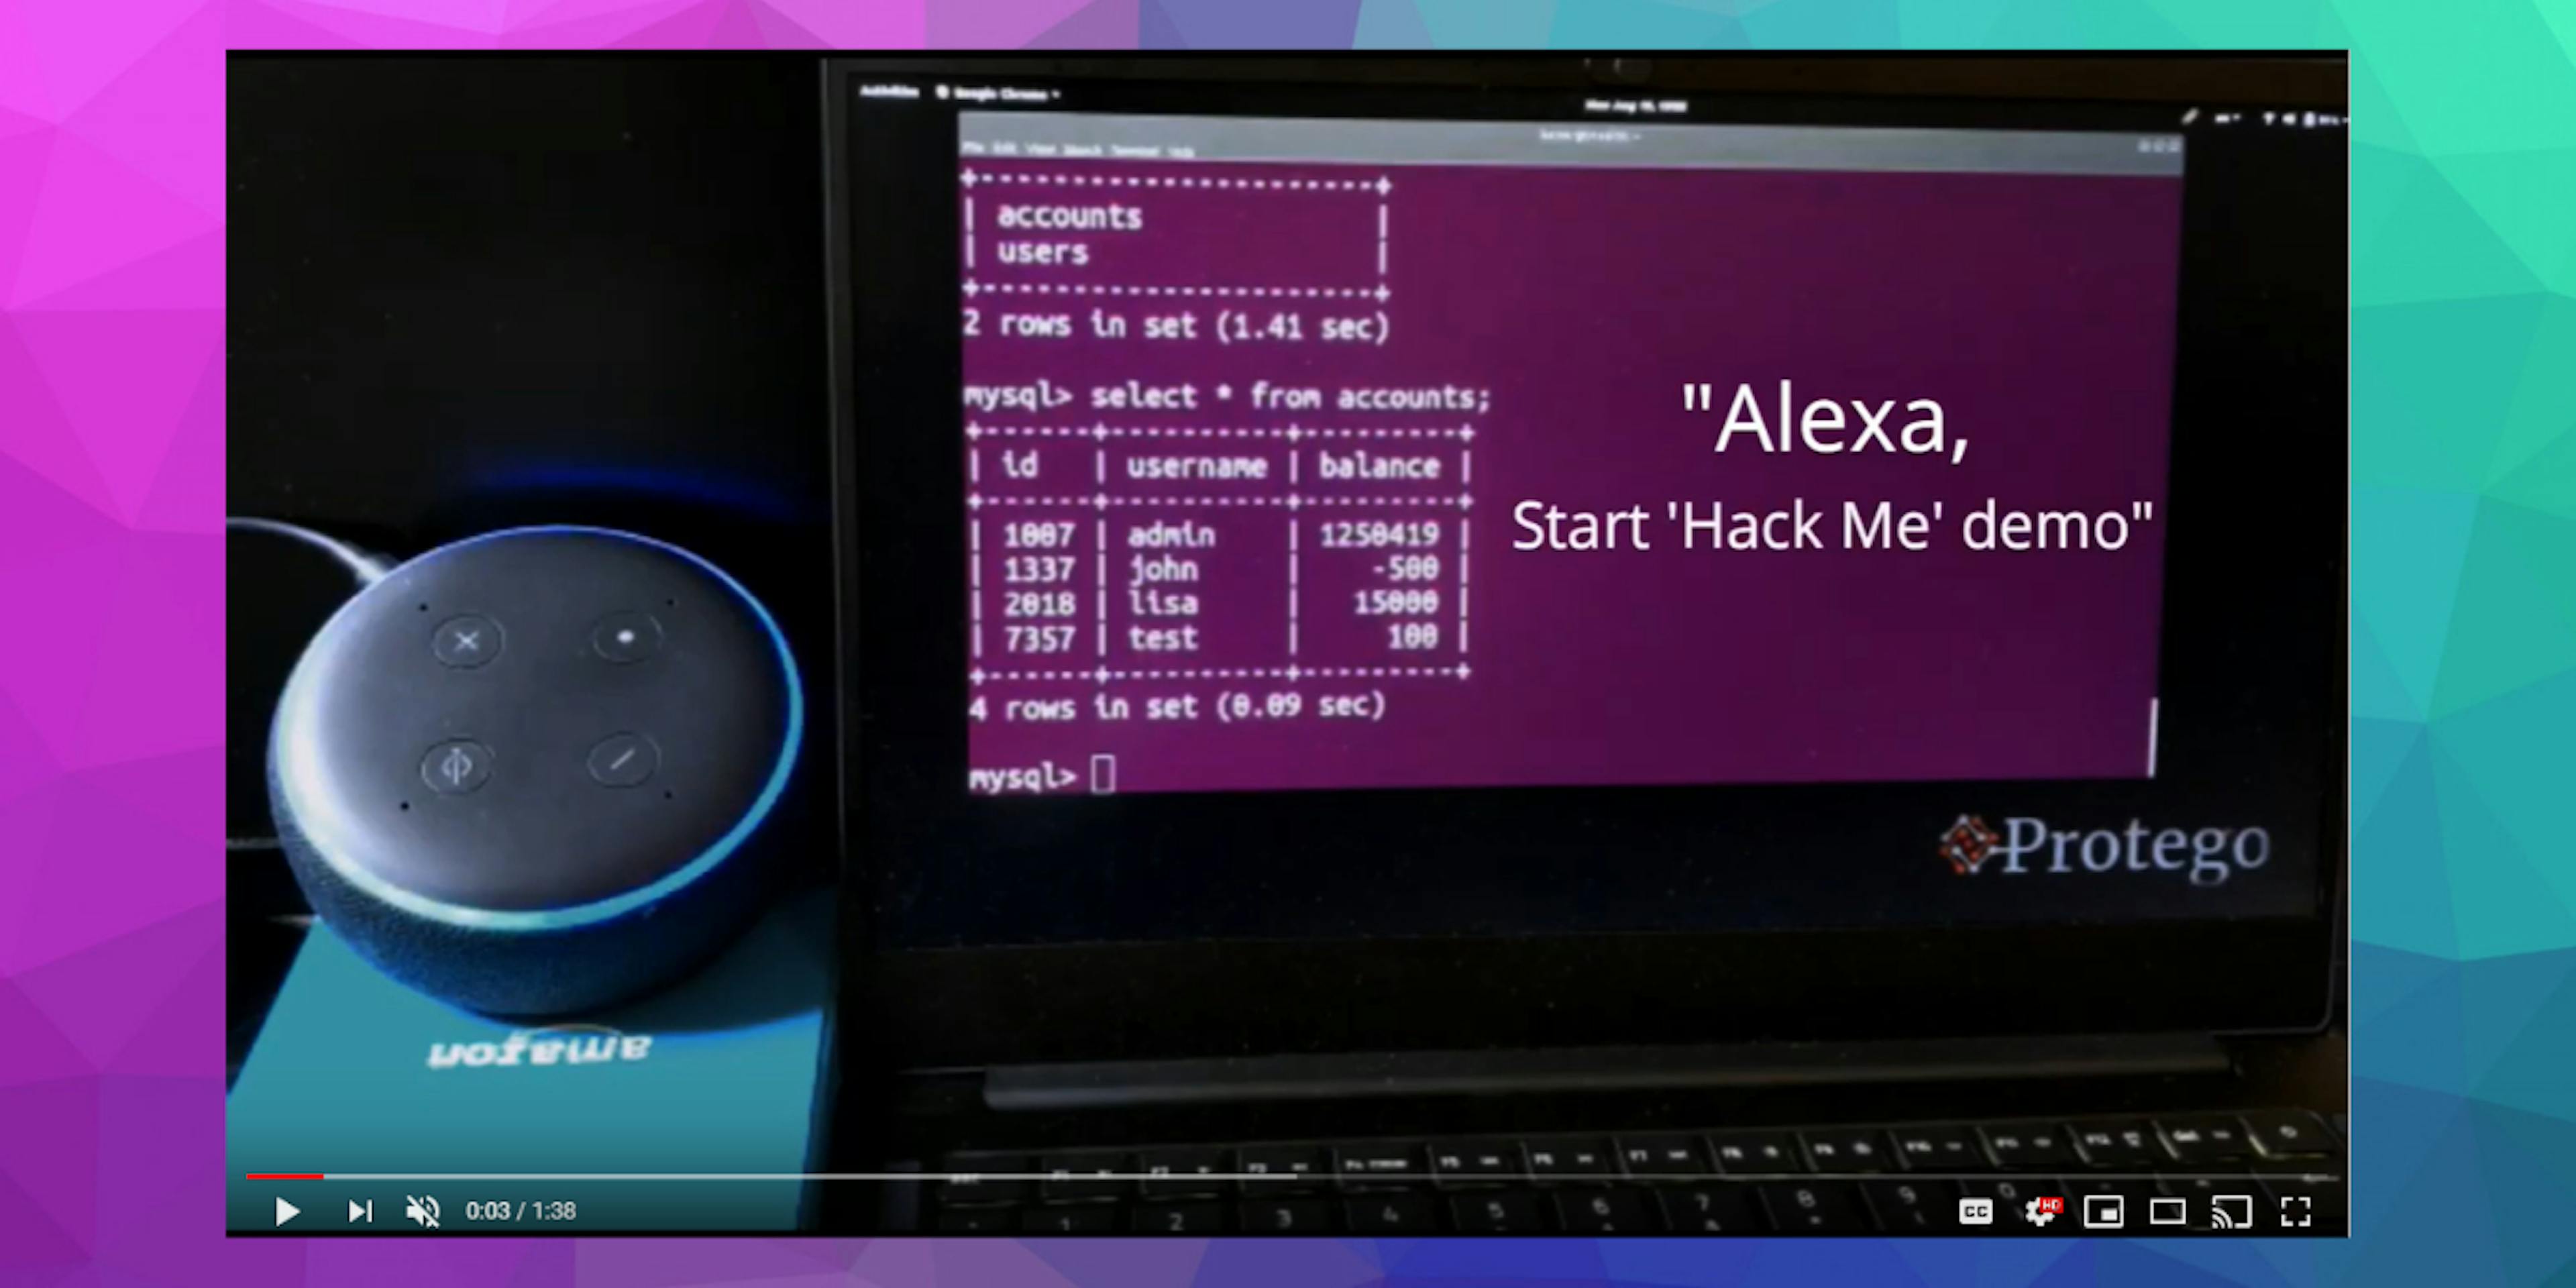 /voice-command-sql-injection-hack-uncovered-for-alexa-9914x3zwp feature image